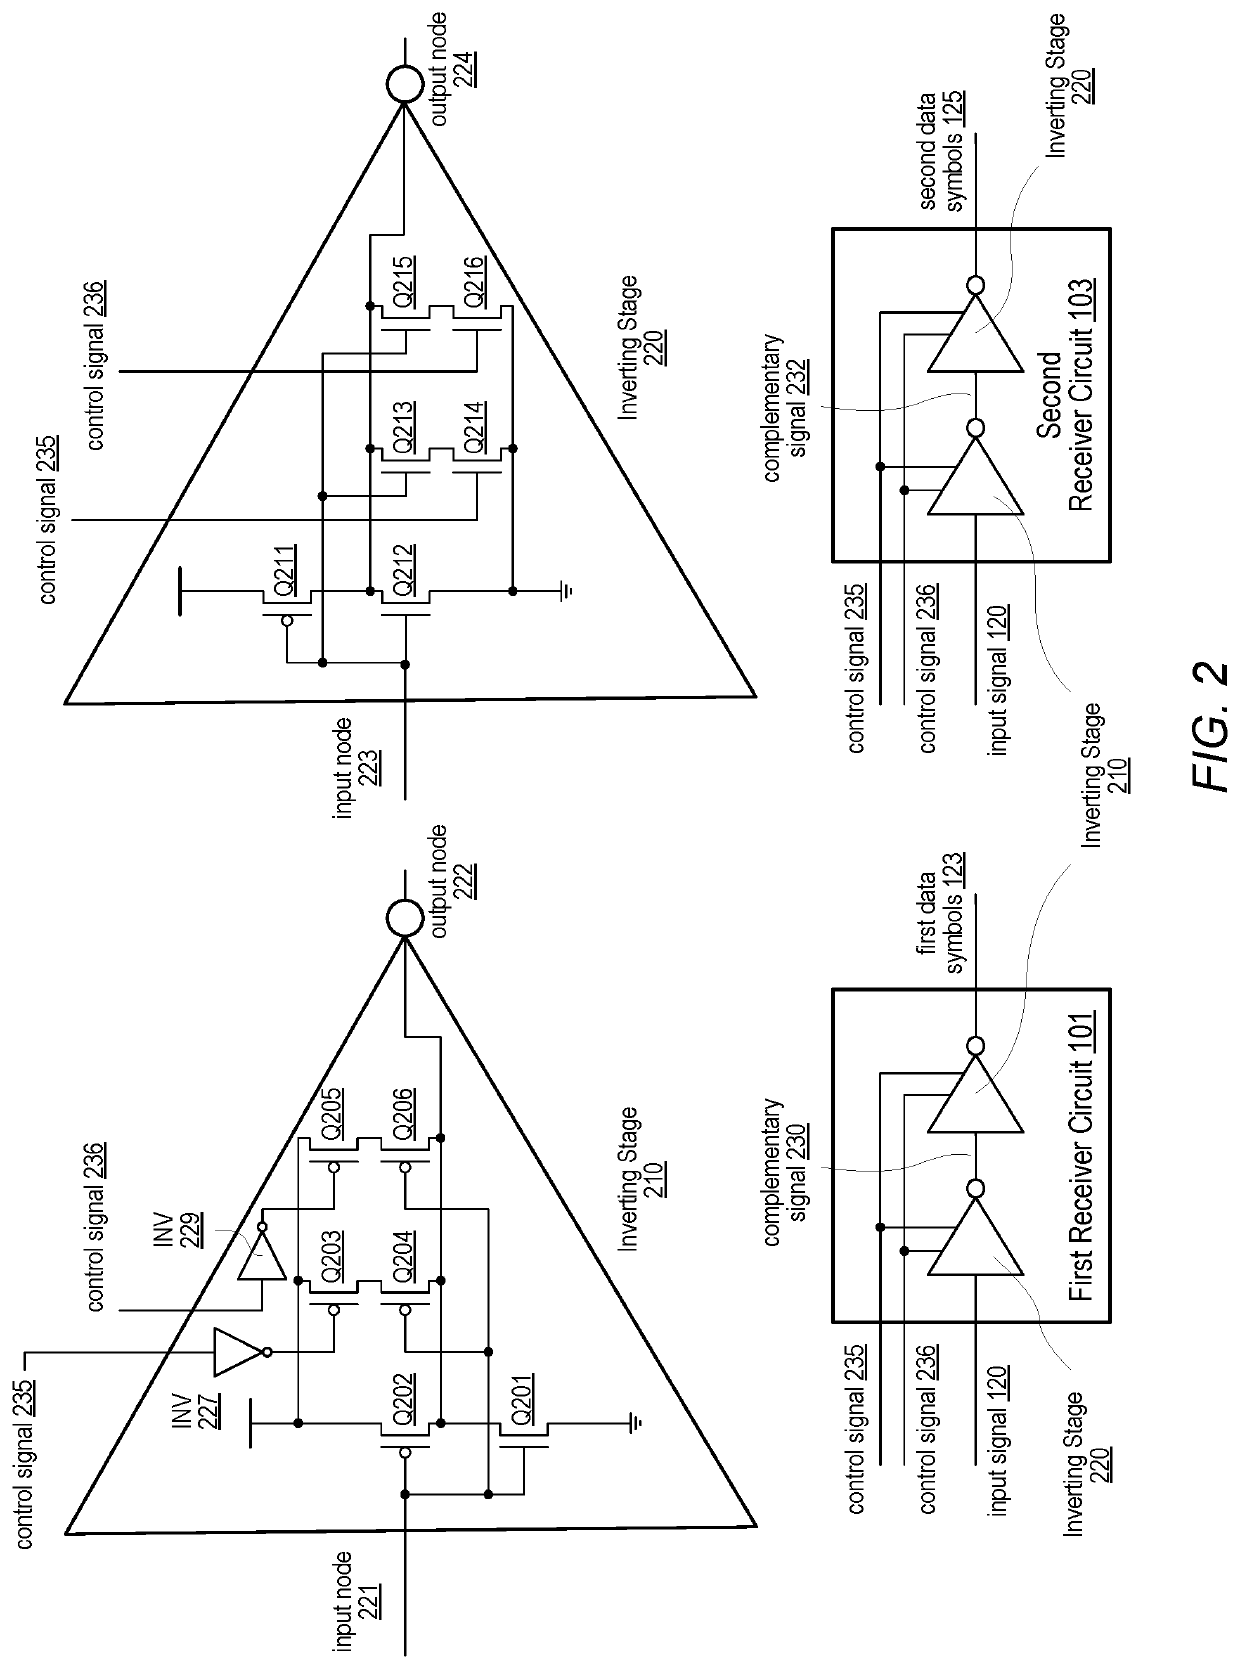 Serial data receiver with decision feedback equalization